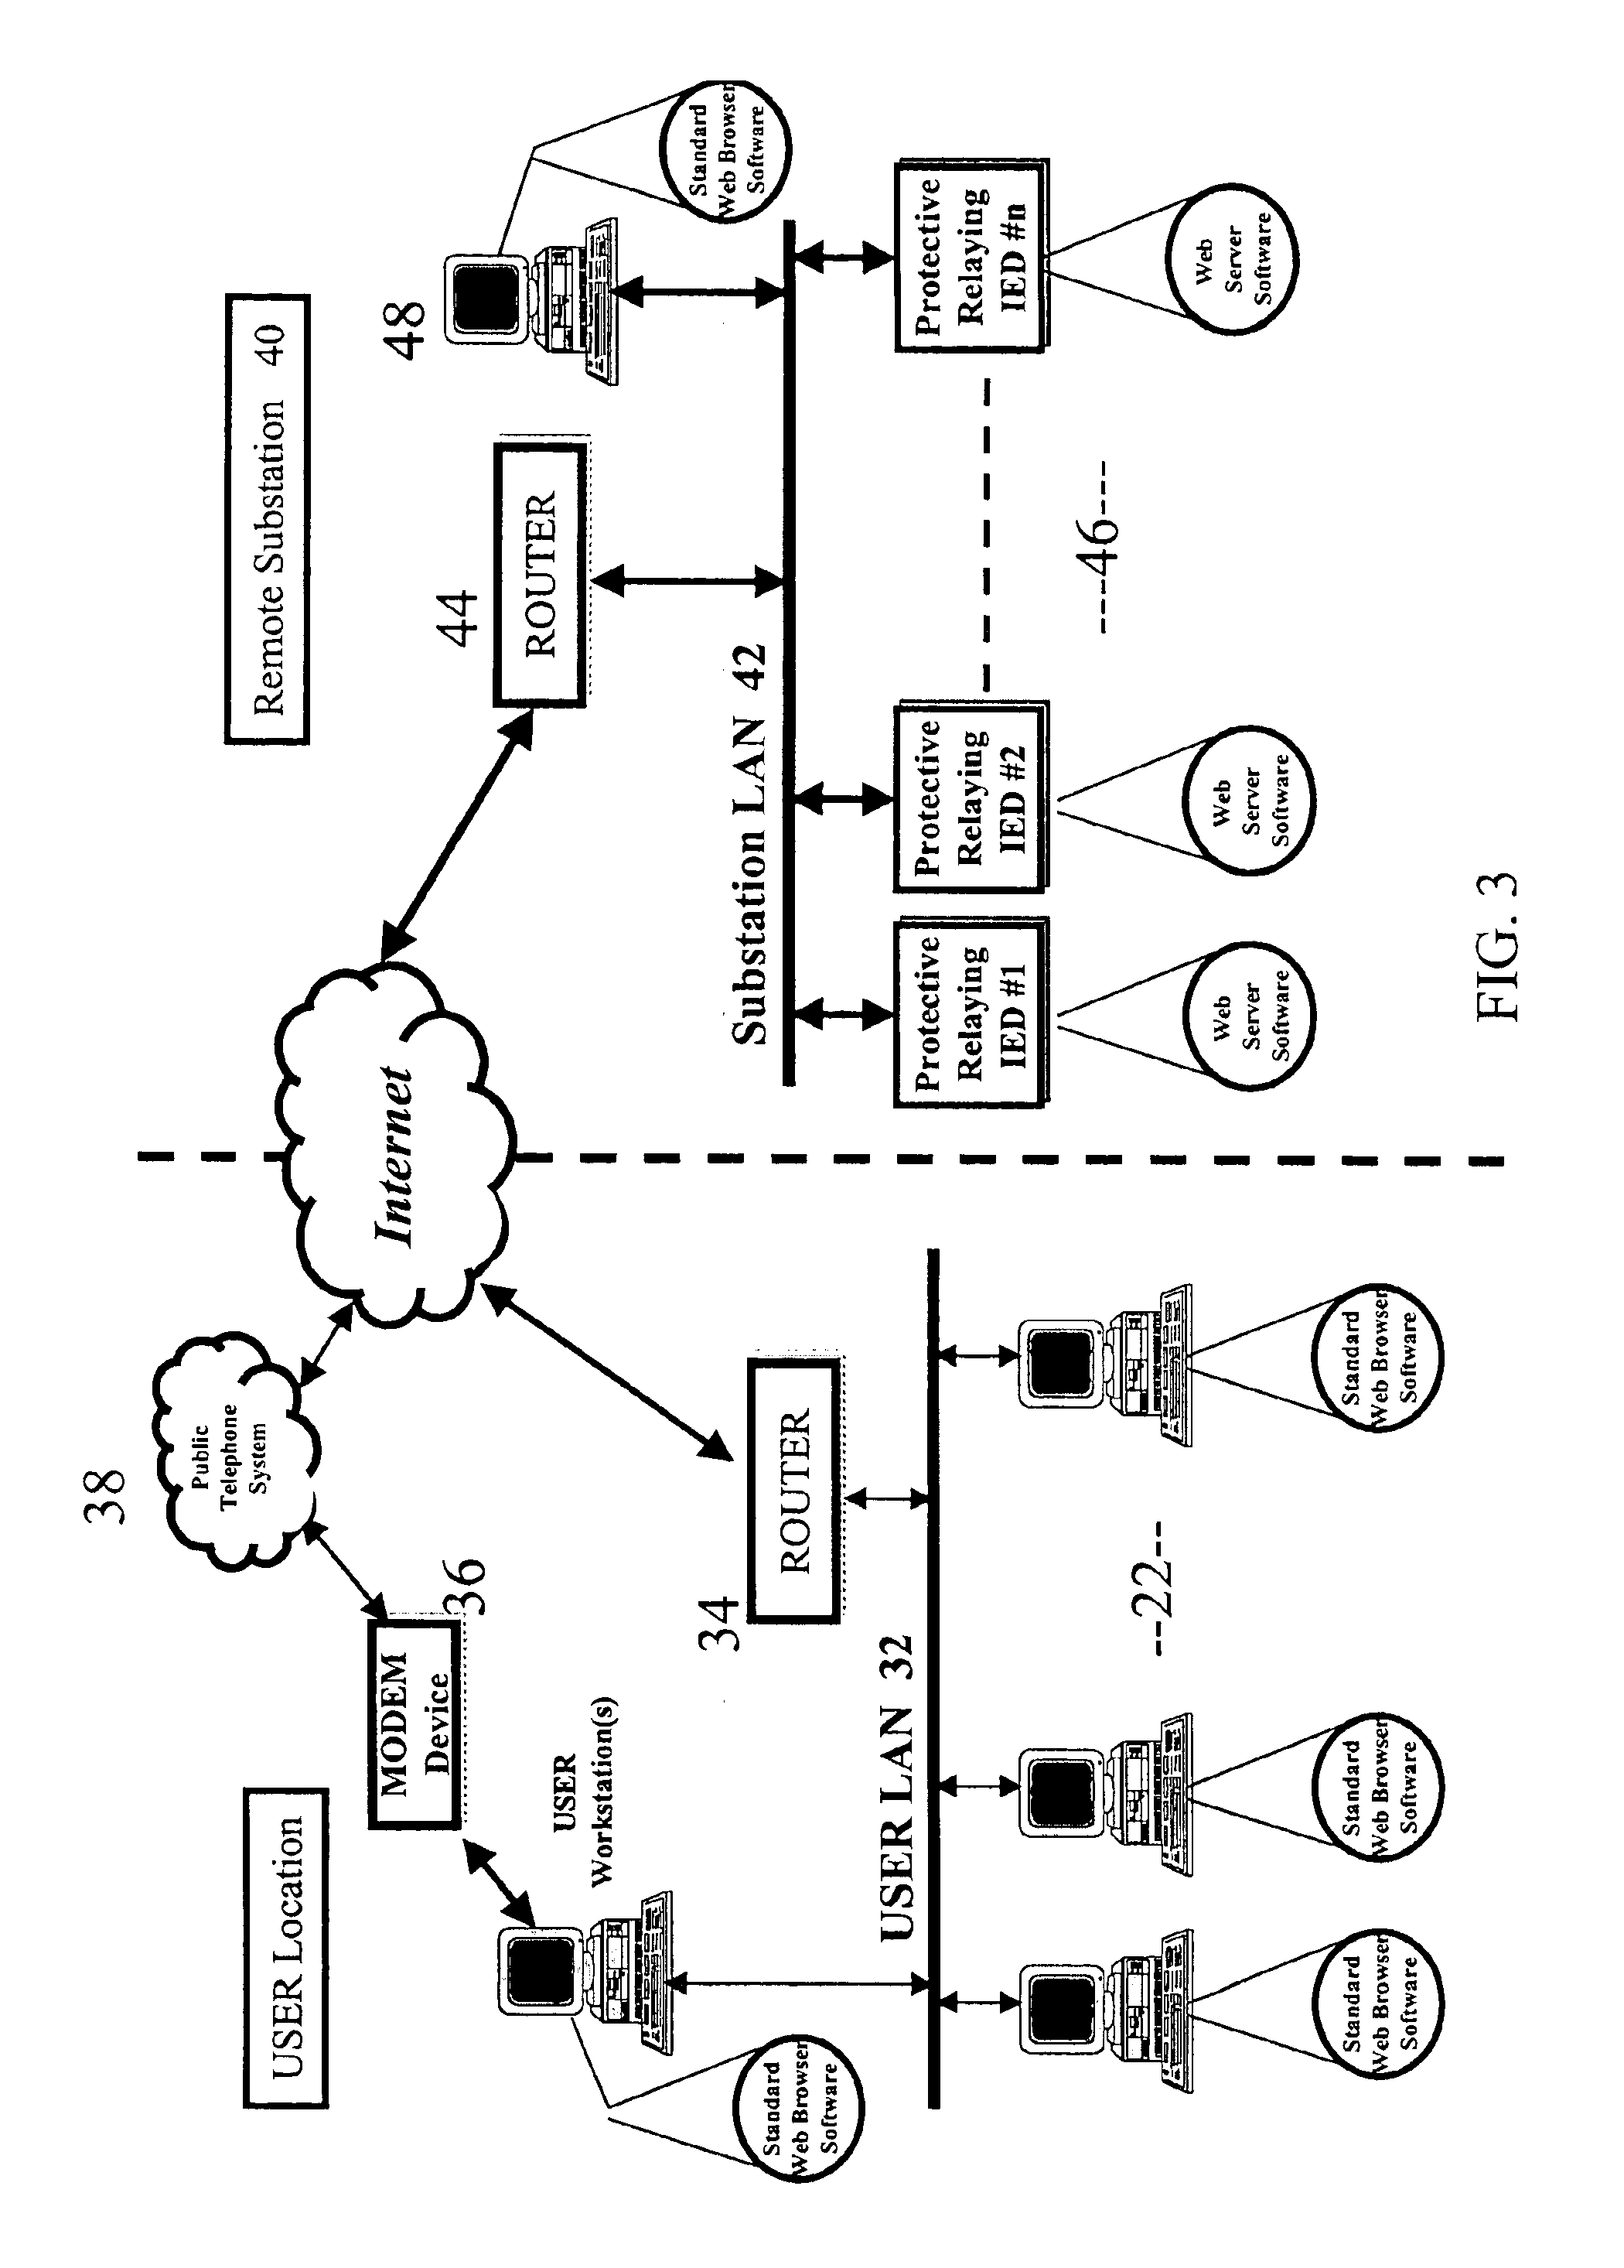 Protective relay with embedded web server